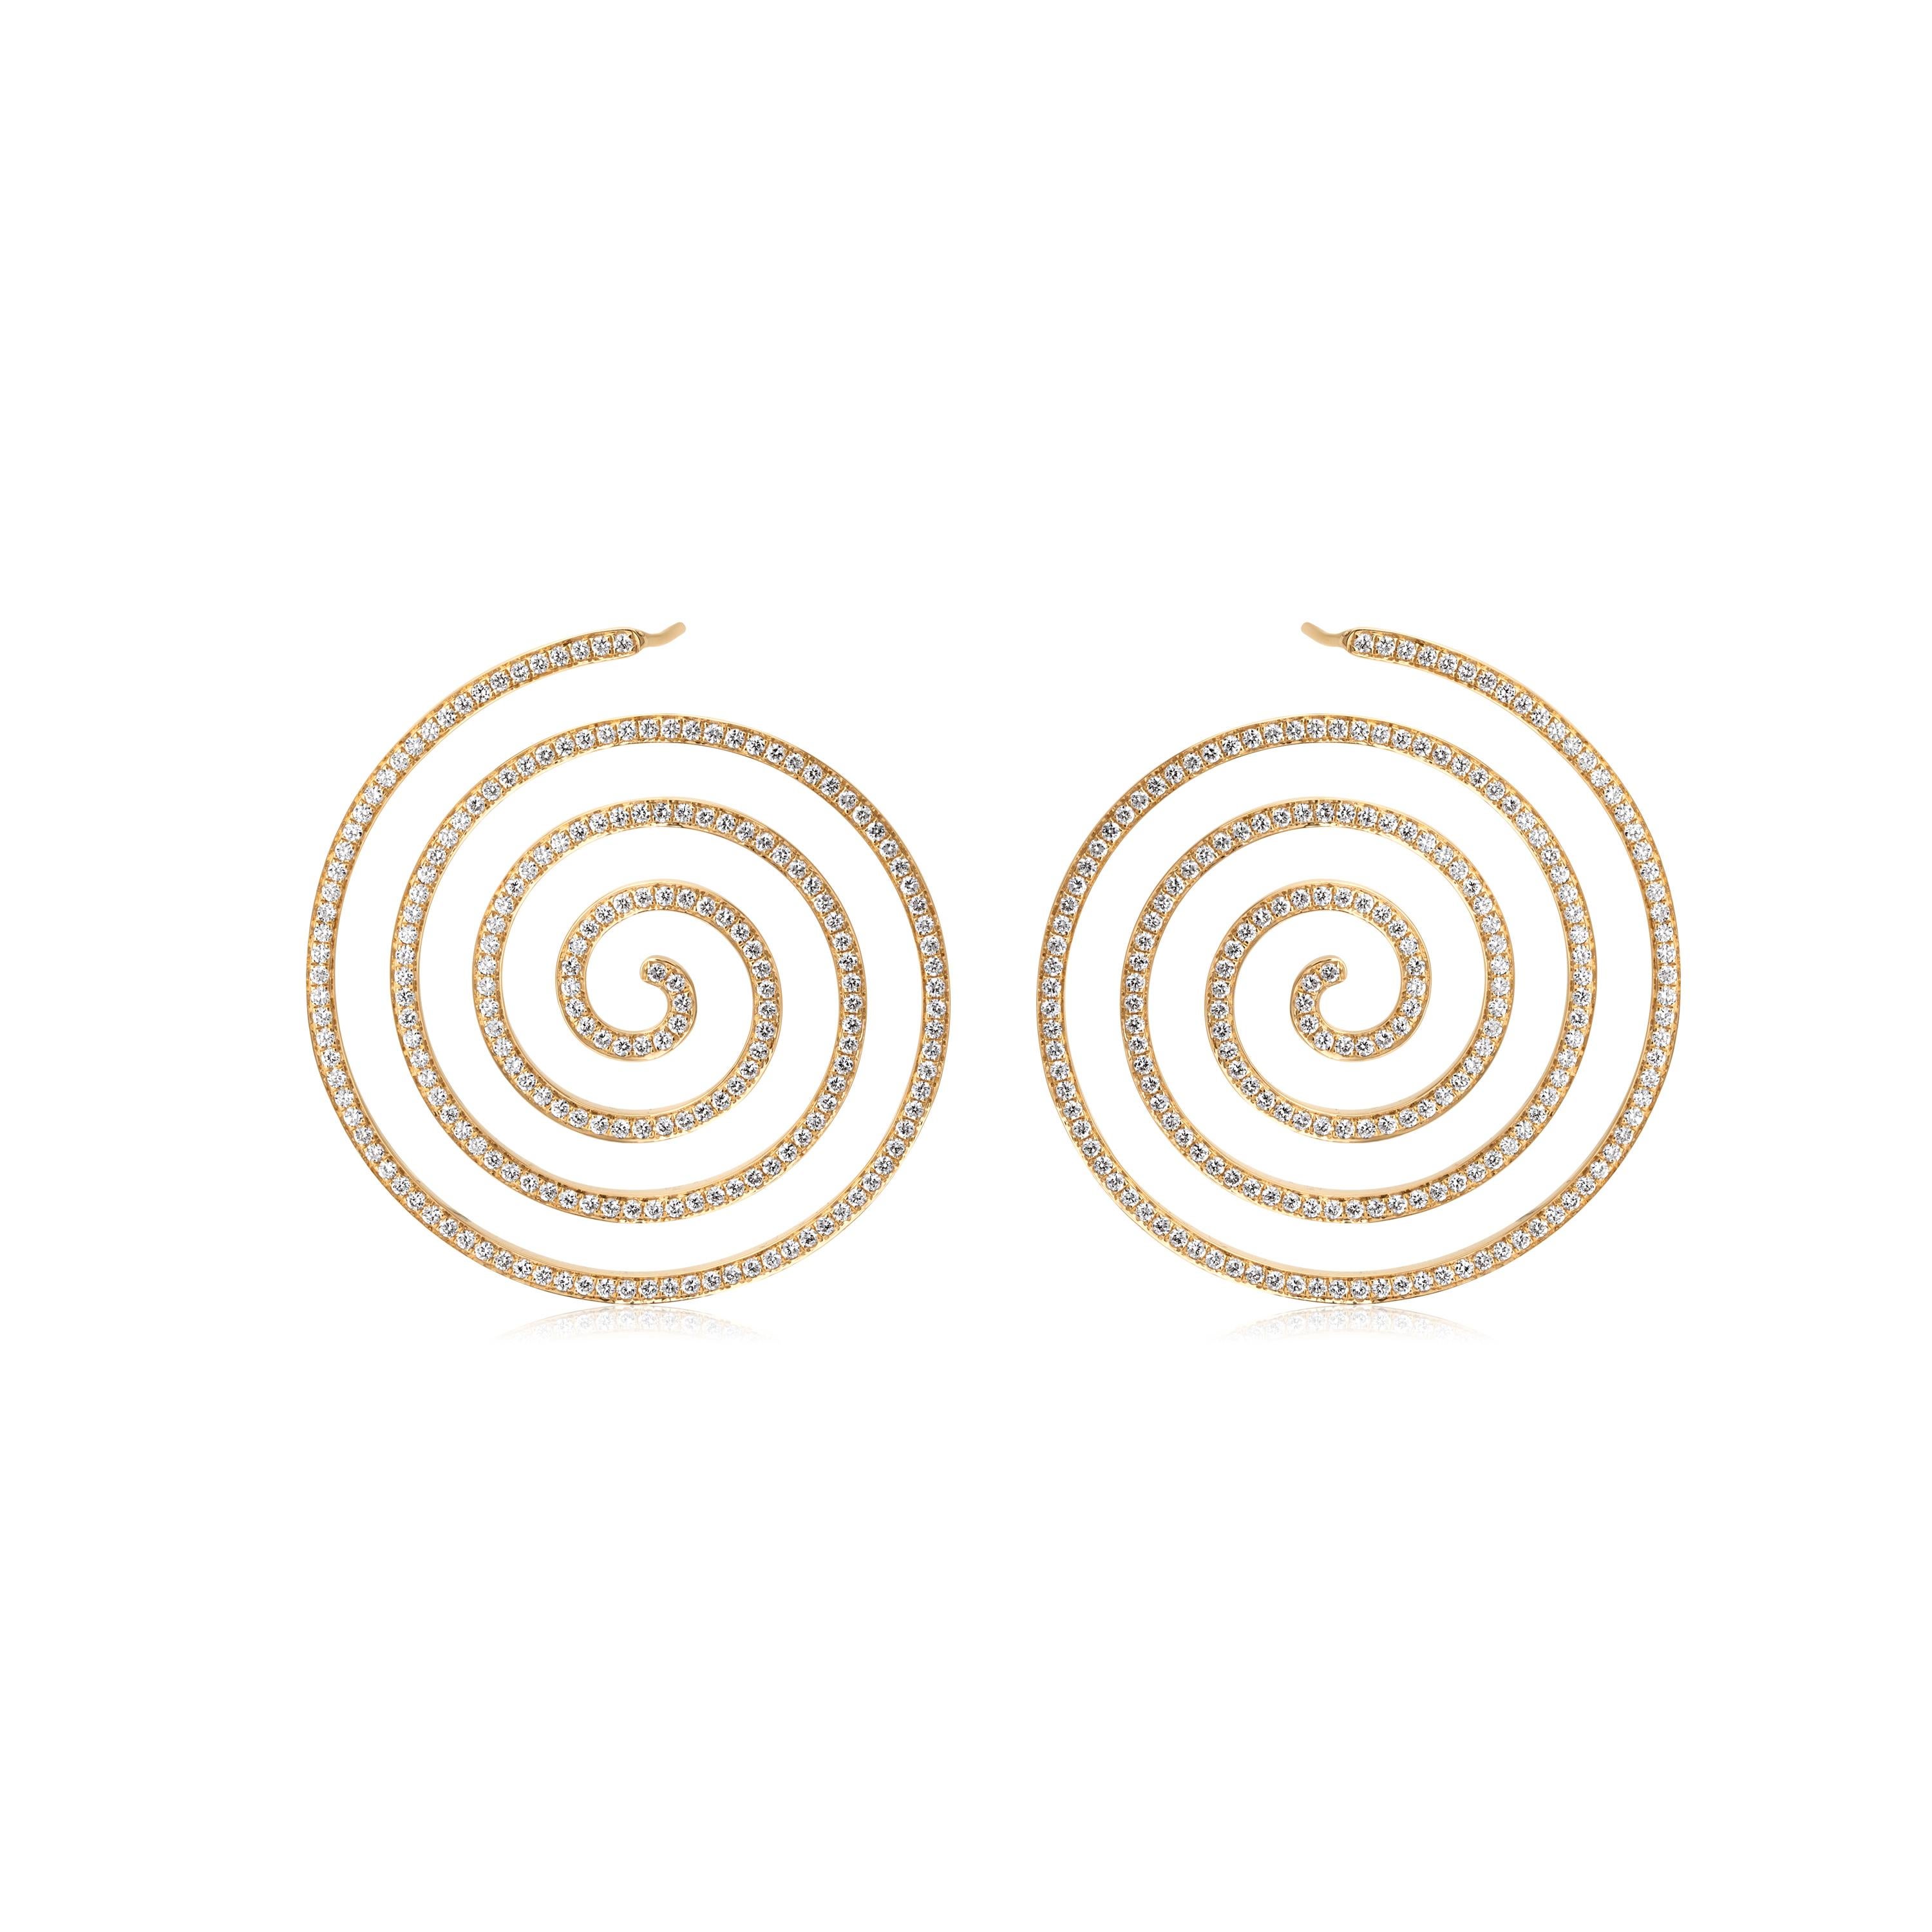 This Nigaam concentrically coiled stud earring pair has round full-cut white diamonds on an 18K Yellow Gold body. The diamonds are SI1 in clarity and GH in color. The diamonds weigh 3.62 Cts. Glam up your daily look with this stylish pair of stud